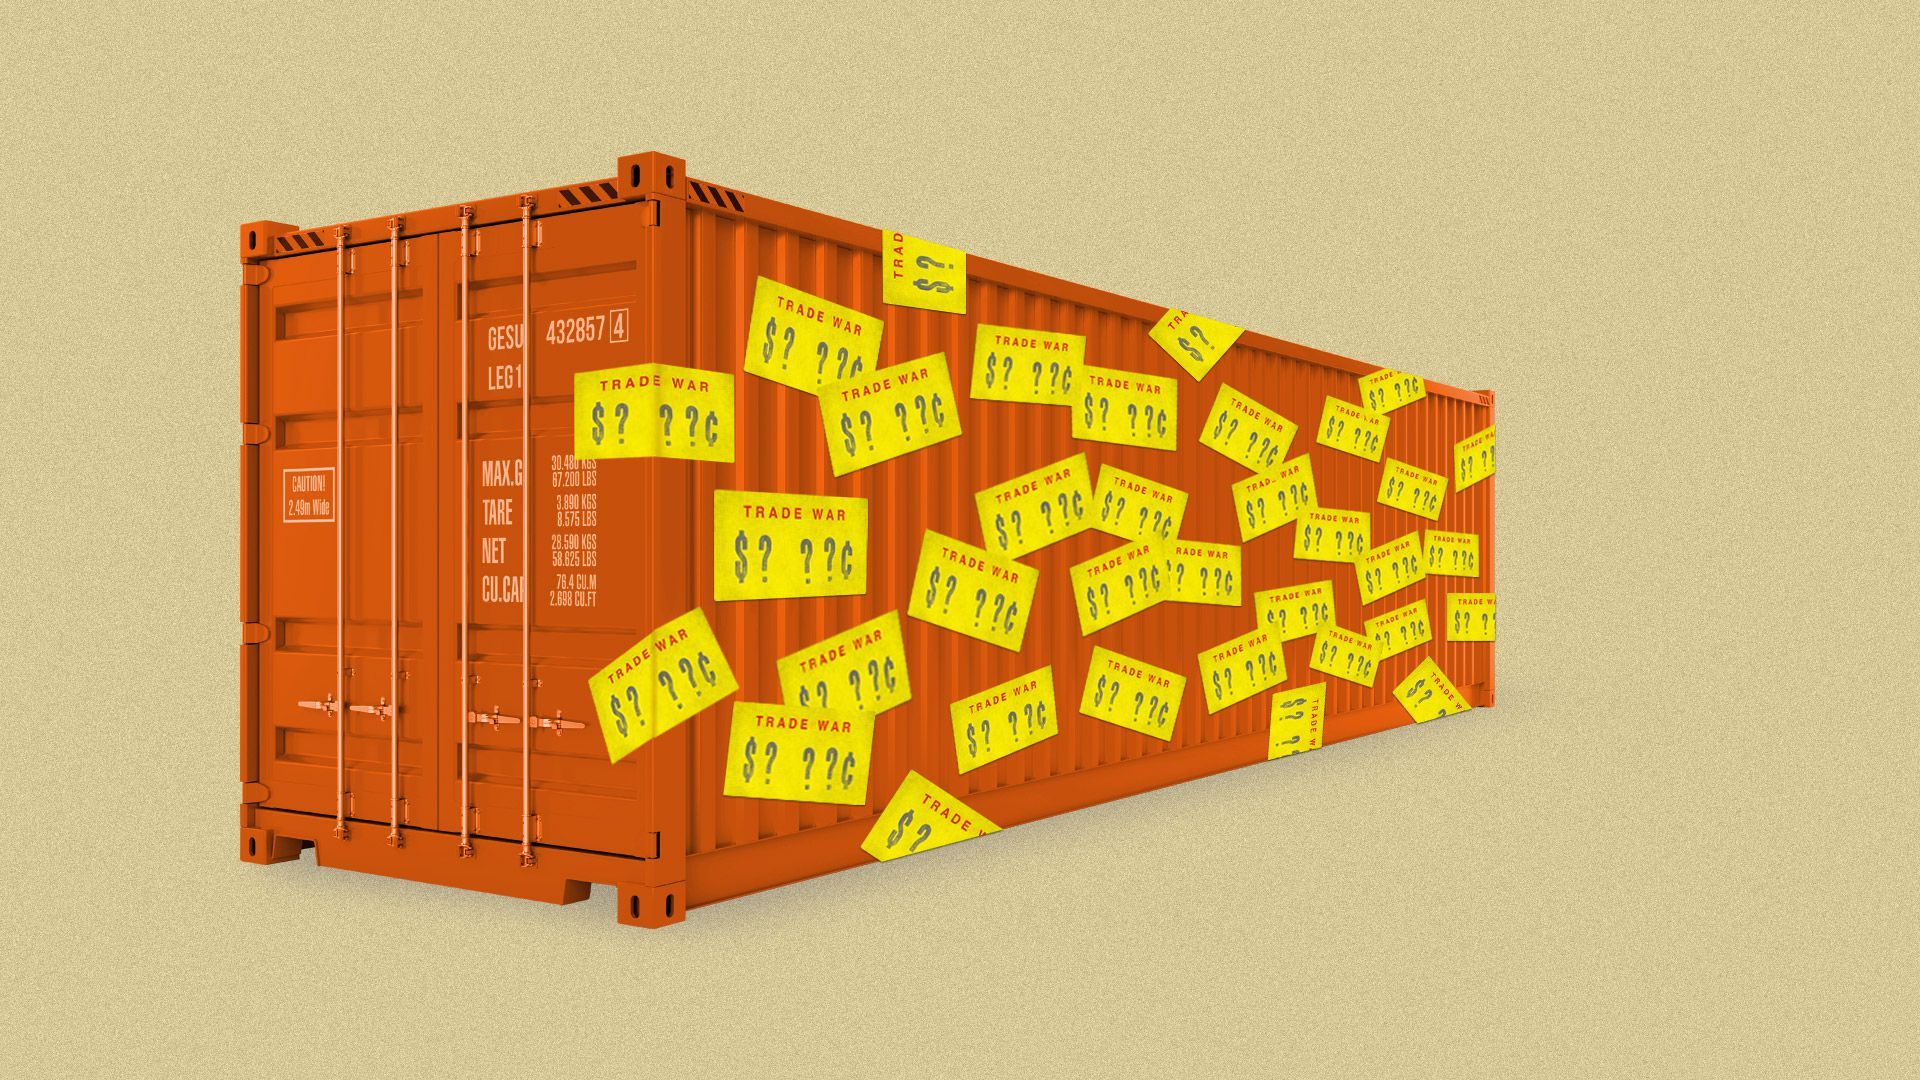 Illustration of a shipping crate